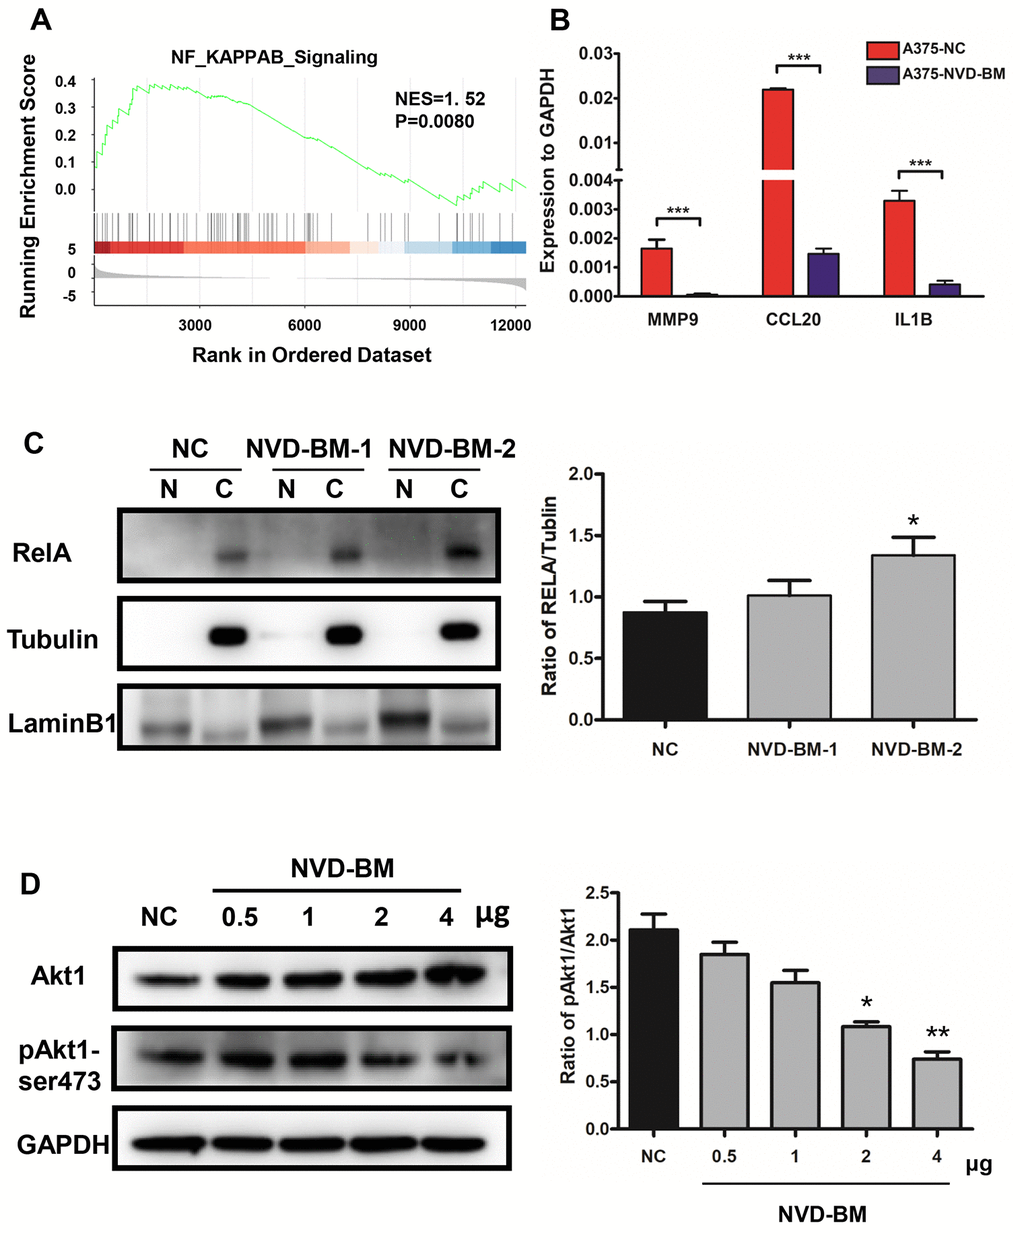 NVD-BM functions as a tumor suppressor via Akt1/NF-κB signaling. (A) GSEA revealed up-regulated genes associated with NF-κB signaling in melanoma (GSE3189 dataset). (B) Gene expression of the NF-κB target genes, MMP9, CCL20 and IL1B relative to GAPDH, in A375 cells transfected with NVD-BM, when compared with A375 cells transfected with blank vector, pCDH. (C) Western blot of A375 cells transfected with two different plasmid NVD-BM concentrations, when compared with pCDH blank vectors, analyzing the entry of RELA into the nucleus. (D) Western blot of A375 cells transfected with two different plasmid NVD-BM concentrations, when compared to the pCDH blank vector analyzed phosphorylated and unphosphorylated Akt1-SER473 with normalization to GAPDH. (*p 